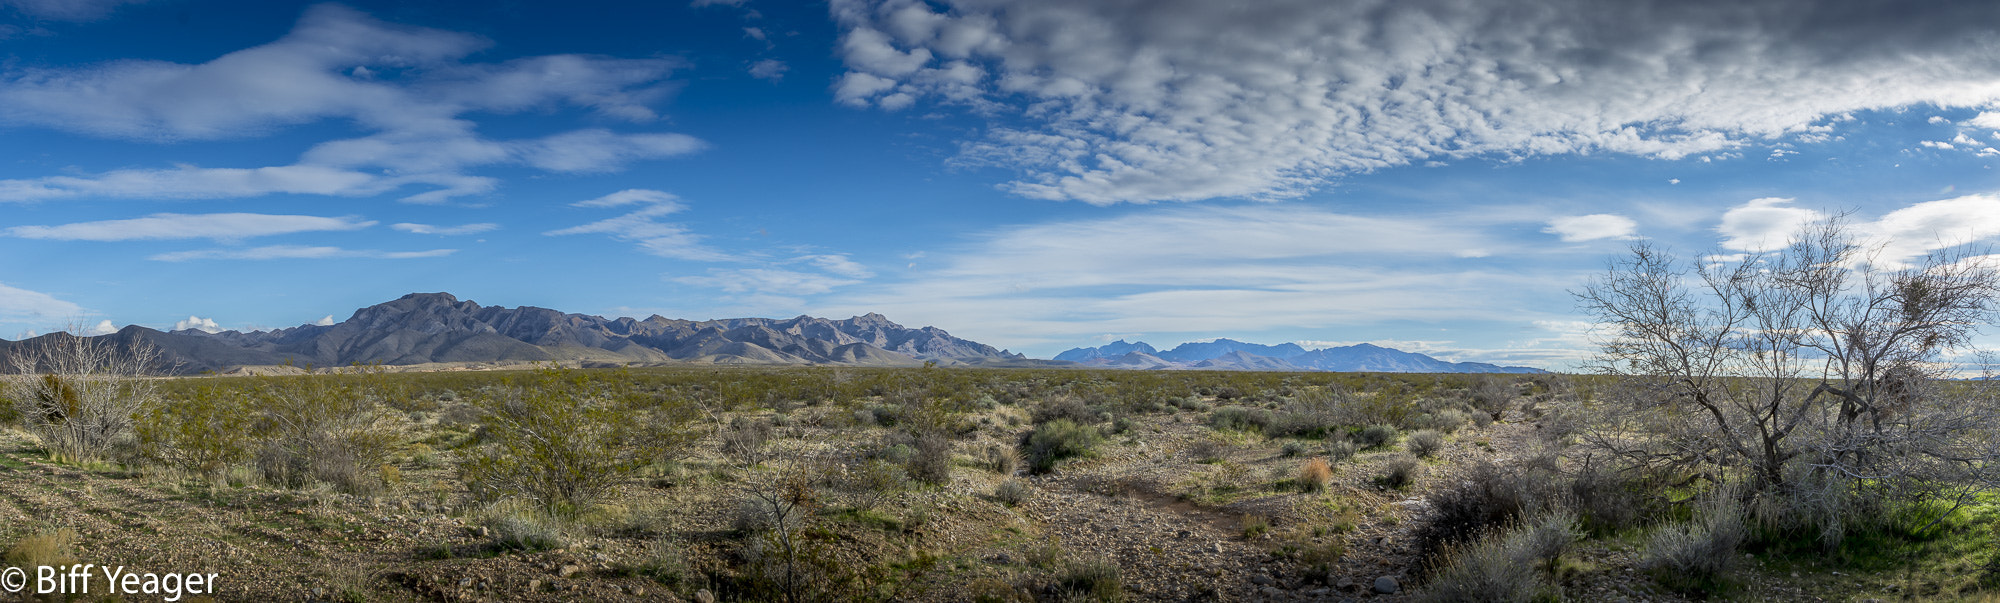 Nikon D7100 sample photo. Valley of fire pano photography